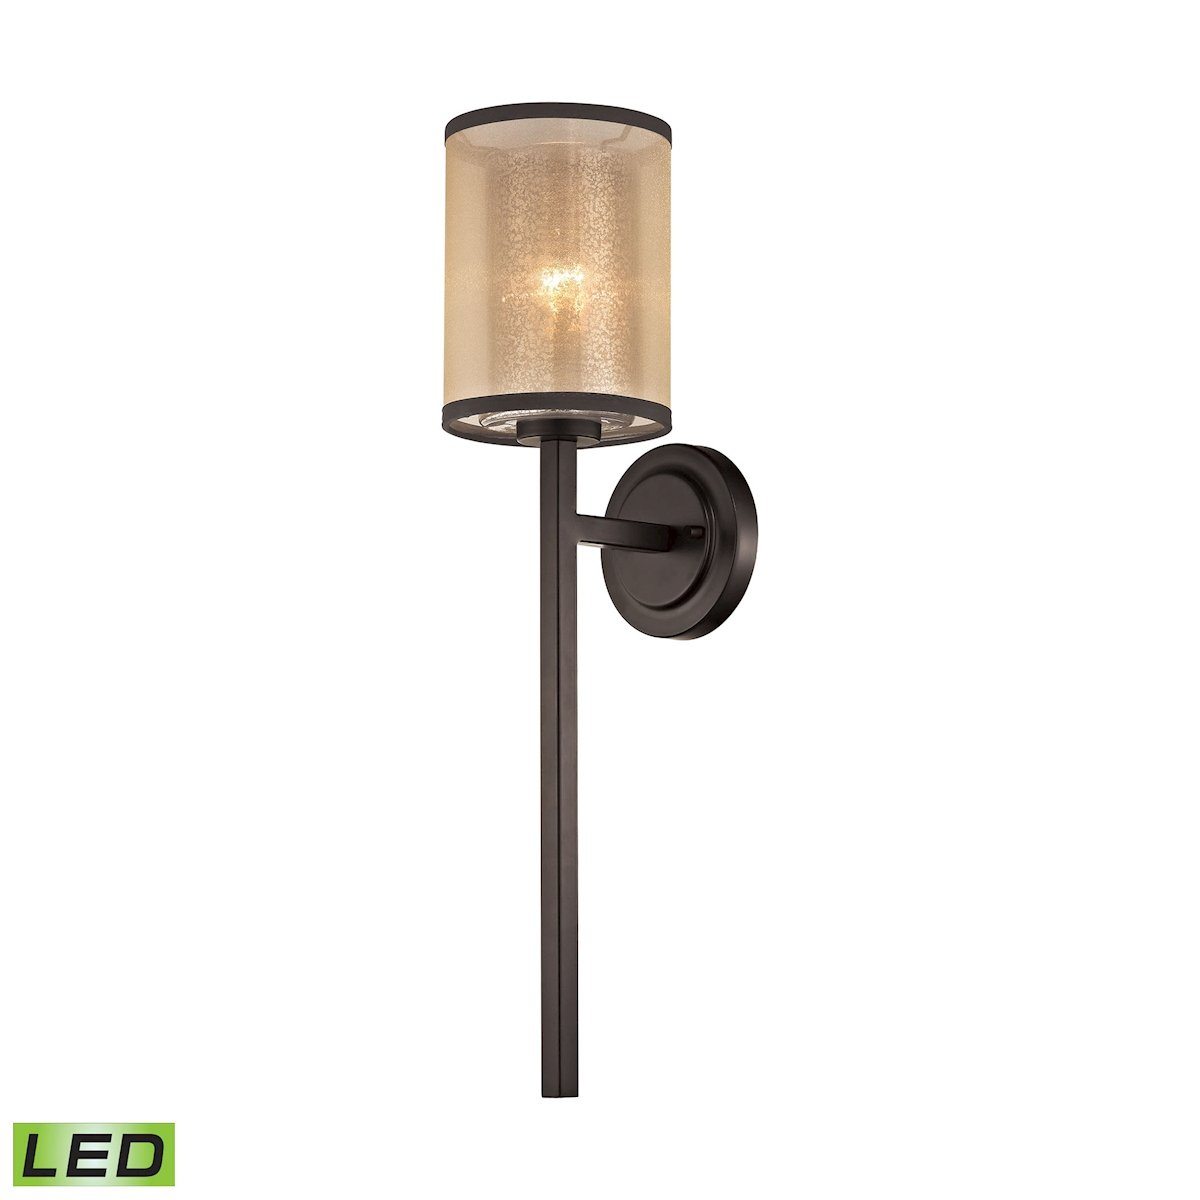 Diffusion 1 Light LED Wall Sconce In Oil Rubbed Bronze Wall Sconce Elk Lighting 